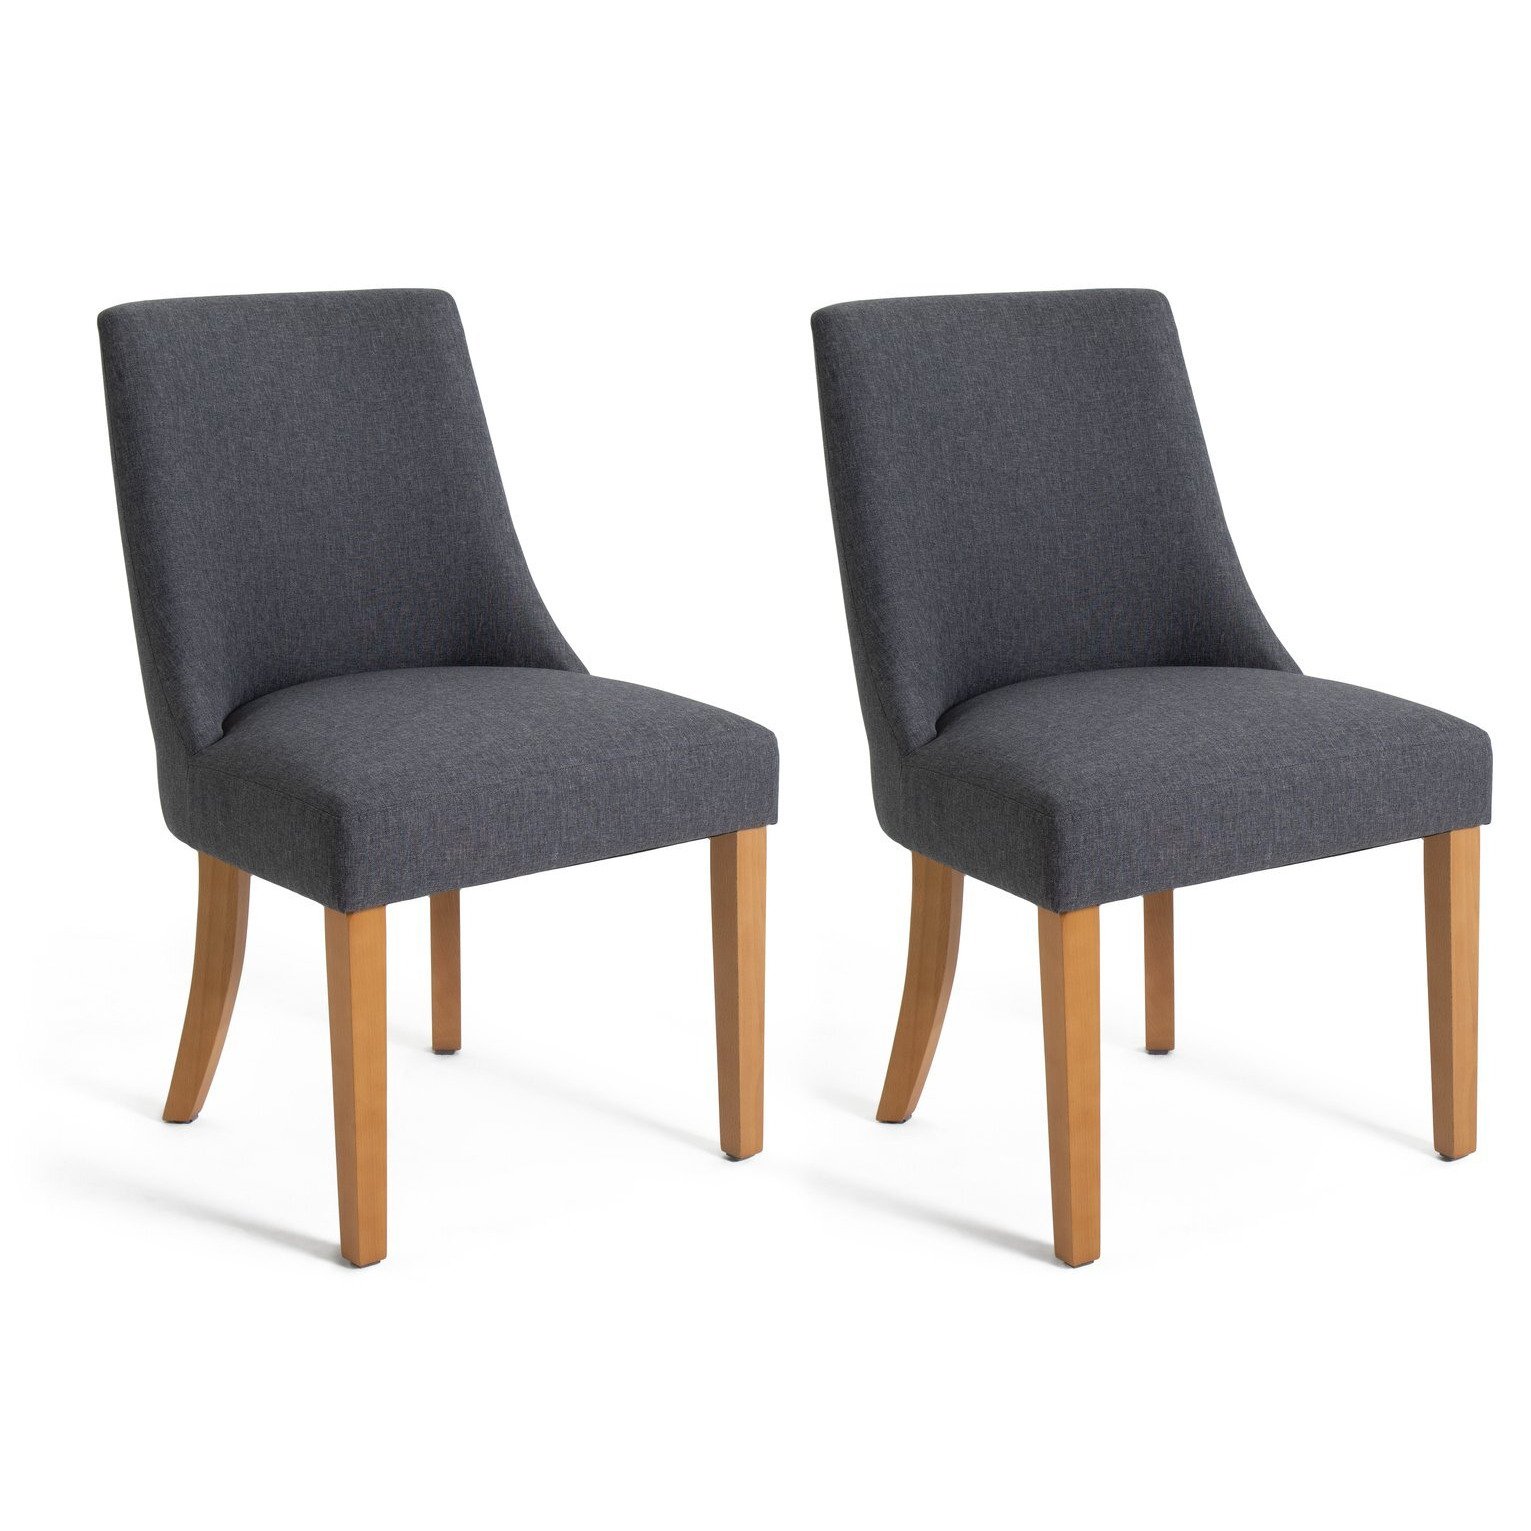 Habitat Alec Pair of Fabric Dining Chair - Charcoal - image 1